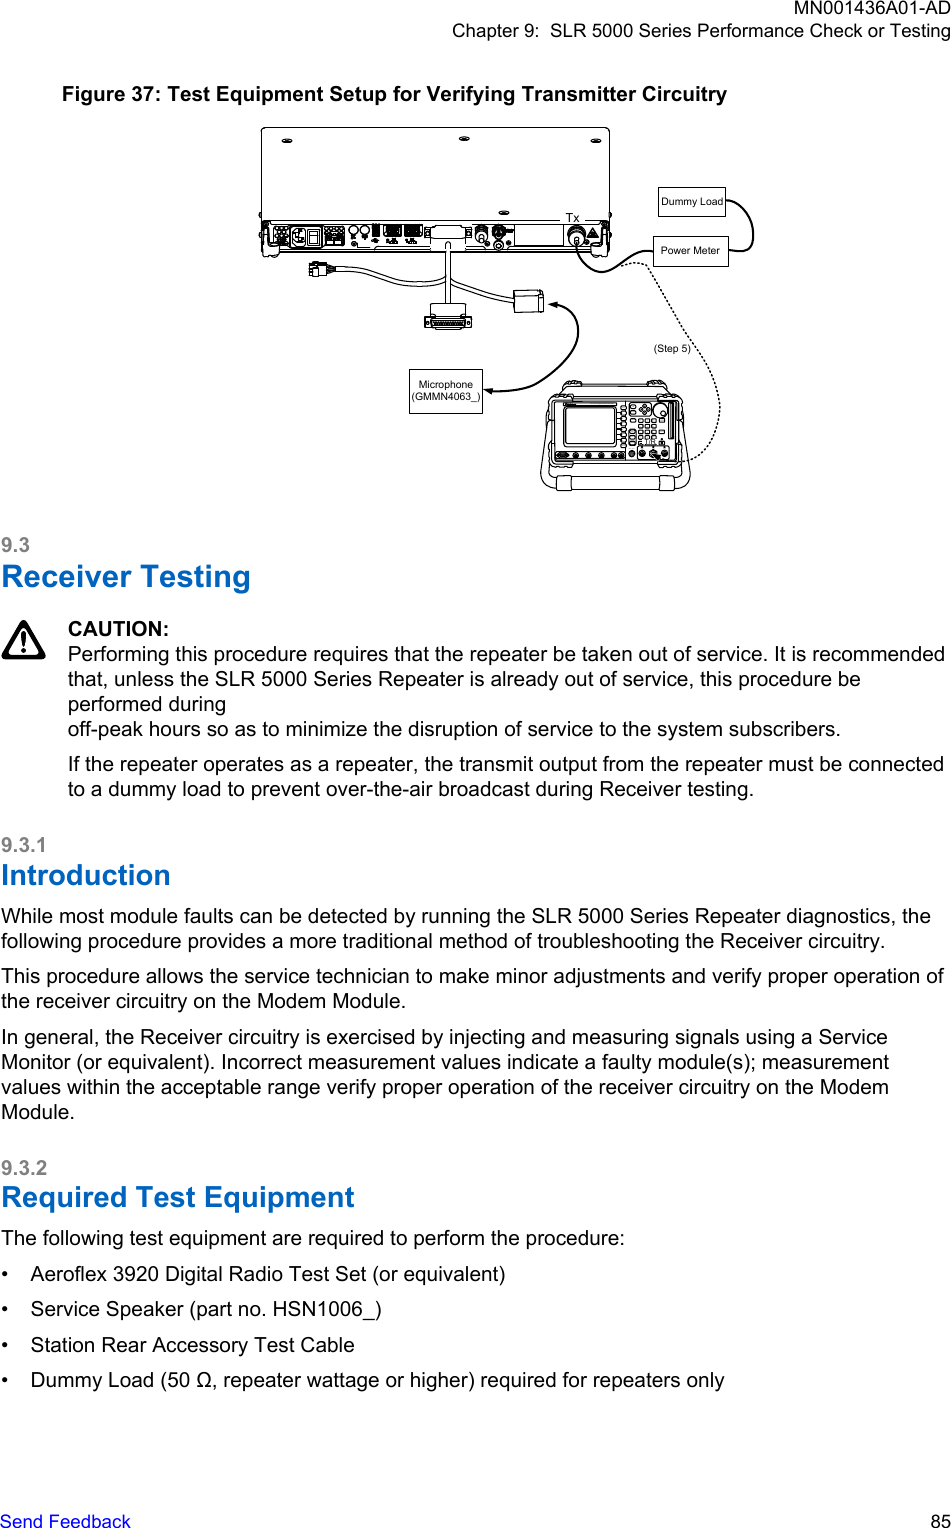 Figure 37: Test Equipment Setup for Verifying Transmitter CircuitryHELP TAB1SELECTCANCELIFR390I Digital Radio Test SetTEST HOLDCONFIGUTILS ENTERMIC/ ACC GEN T/R ANTRETURNTESTPORT CH1SCOPECH2 1 2AUDIOINFCTNGEN/DEMODOUT0.#ASSIGN–*24 5 67HELP8 93T/RPower MeterDummy LoadTx(Step 5)Microphone(GMMN4063_)9.3Receiver TestingCAUTION:Performing this procedure requires that the repeater be taken out of service. It is recommendedthat, unless the SLR 5000 Series Repeater is already out of service, this procedure beperformed during off-peak hours so as to minimize the disruption of service to the system subscribers.If the repeater operates as a repeater, the transmit output from the repeater must be connectedto a dummy load to prevent over-the-air broadcast during Receiver testing.9.3.1IntroductionWhile most module faults can be detected by running the SLR 5000 Series Repeater diagnostics, thefollowing procedure provides a more traditional method of troubleshooting the Receiver circuitry.This procedure allows the service technician to make minor adjustments and verify proper operation ofthe receiver circuitry on the Modem Module.In general, the Receiver circuitry is exercised by injecting and measuring signals using a ServiceMonitor (or equivalent). Incorrect measurement values indicate a faulty module(s); measurementvalues within the acceptable range verify proper operation of the receiver circuitry on the ModemModule.9.3.2Required Test EquipmentThe following test equipment are required to perform the procedure:• Aeroflex 3920 Digital Radio Test Set (or equivalent)• Service Speaker (part no. HSN1006_)• Station Rear Accessory Test Cable• Dummy Load (50 Ω, repeater wattage or higher) required for repeaters onlyMN001436A01-ADChapter 9:  SLR 5000 Series Performance Check or TestingSend Feedback   85